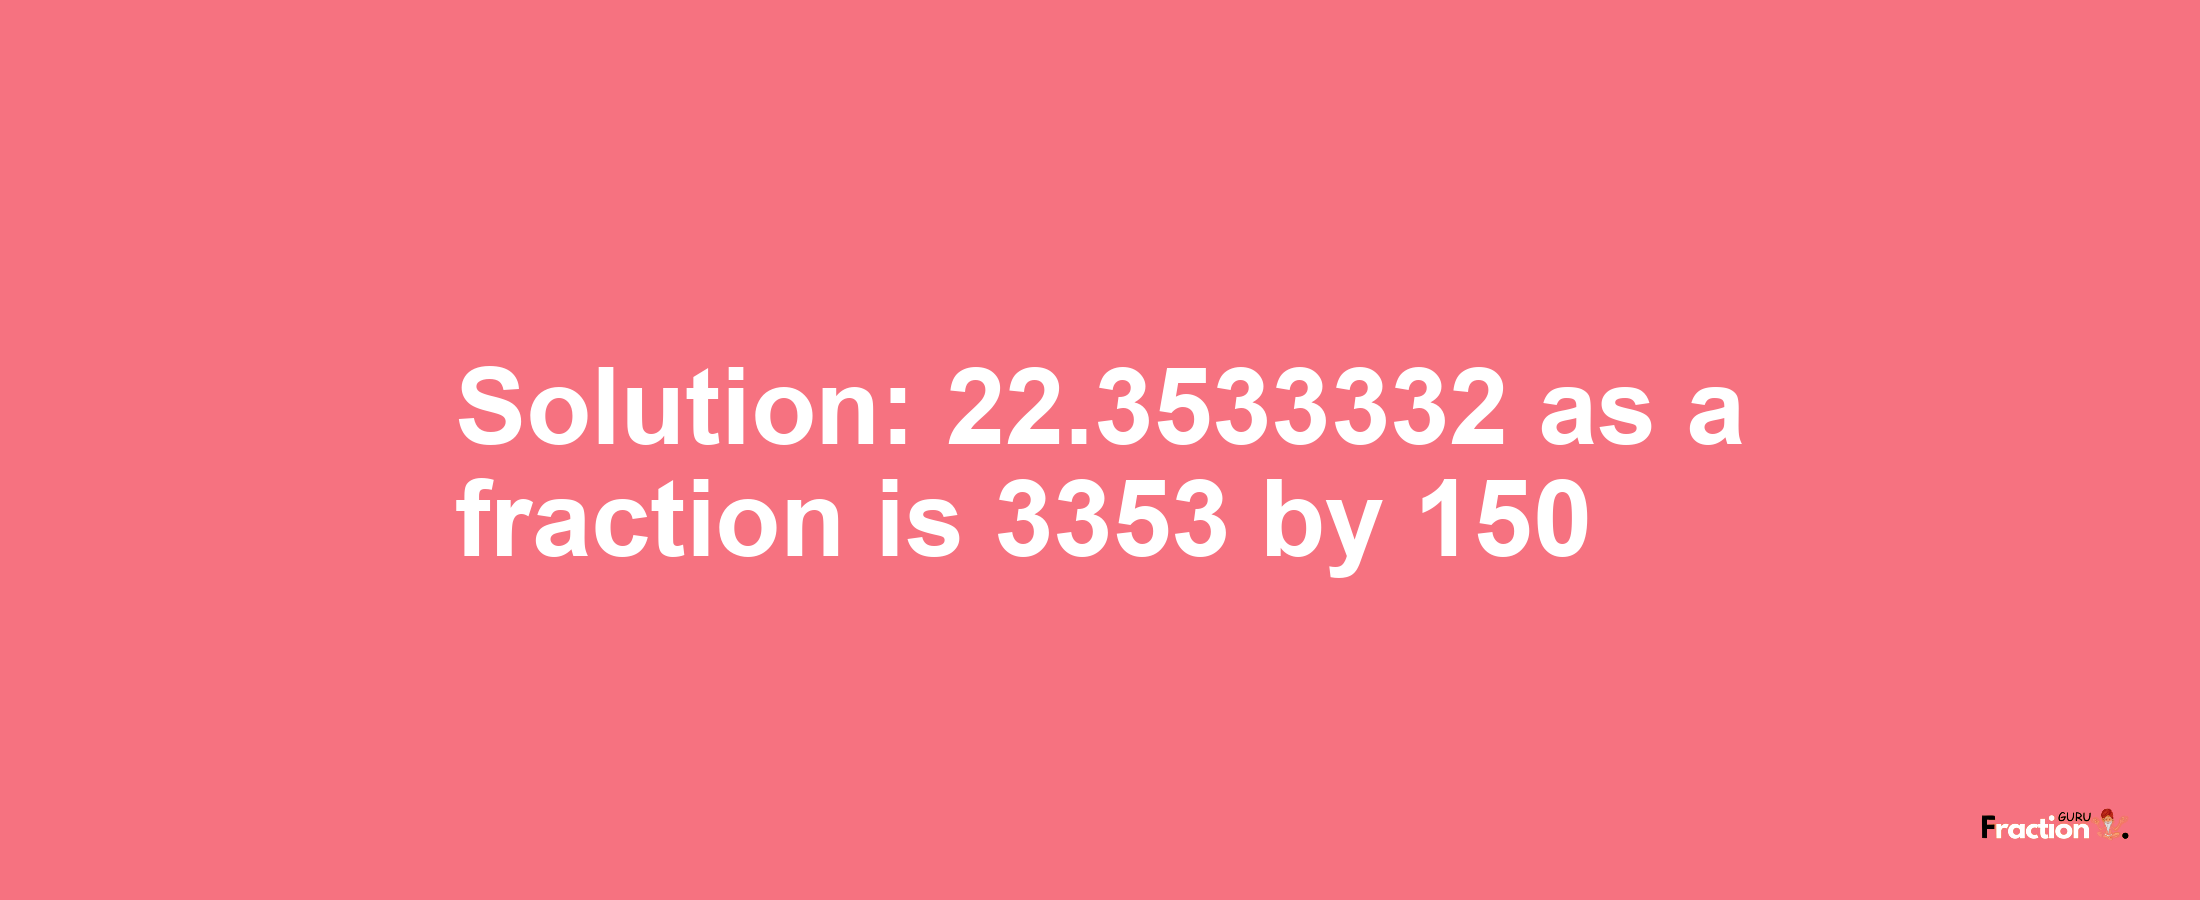 Solution:22.3533332 as a fraction is 3353/150